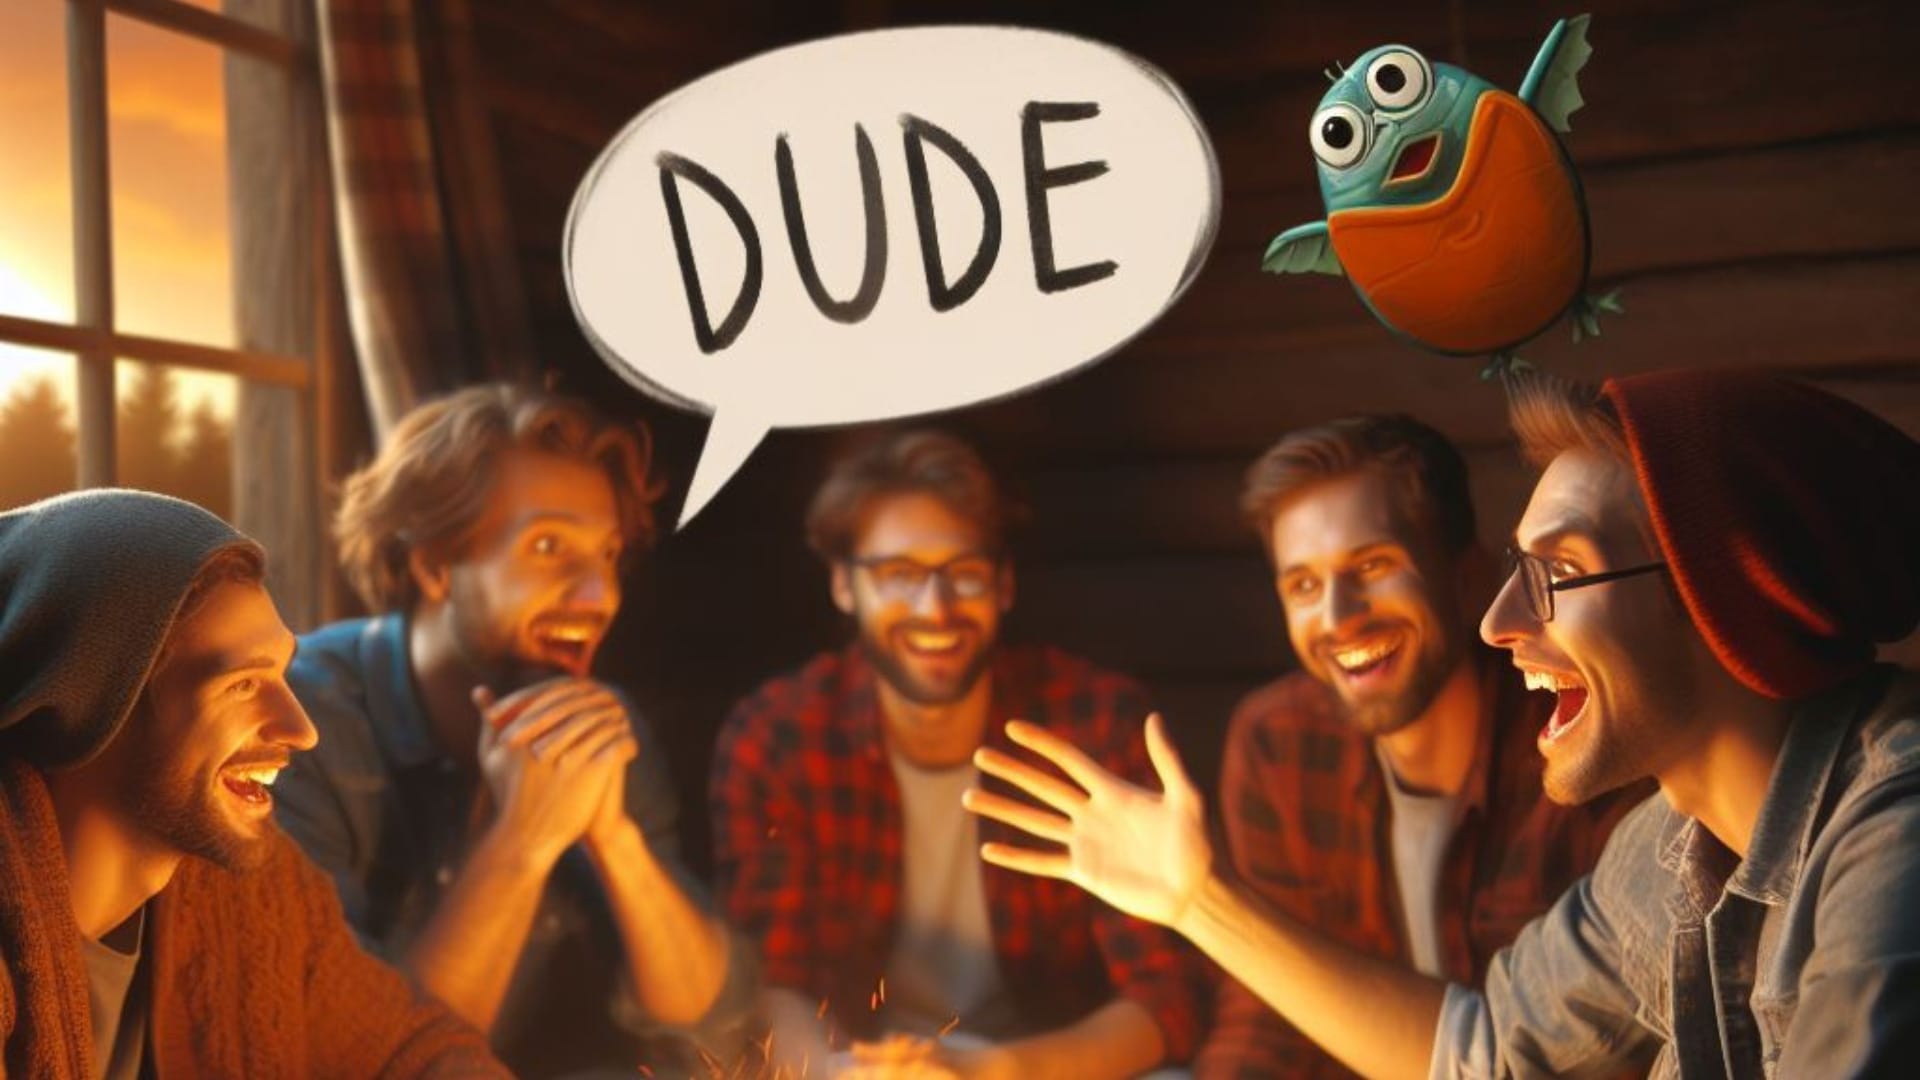 Unraveling the meaning when a guy calls you 'dude' around a heartwarming campfire. Friendship, stories, and laughter define this memorable moment.